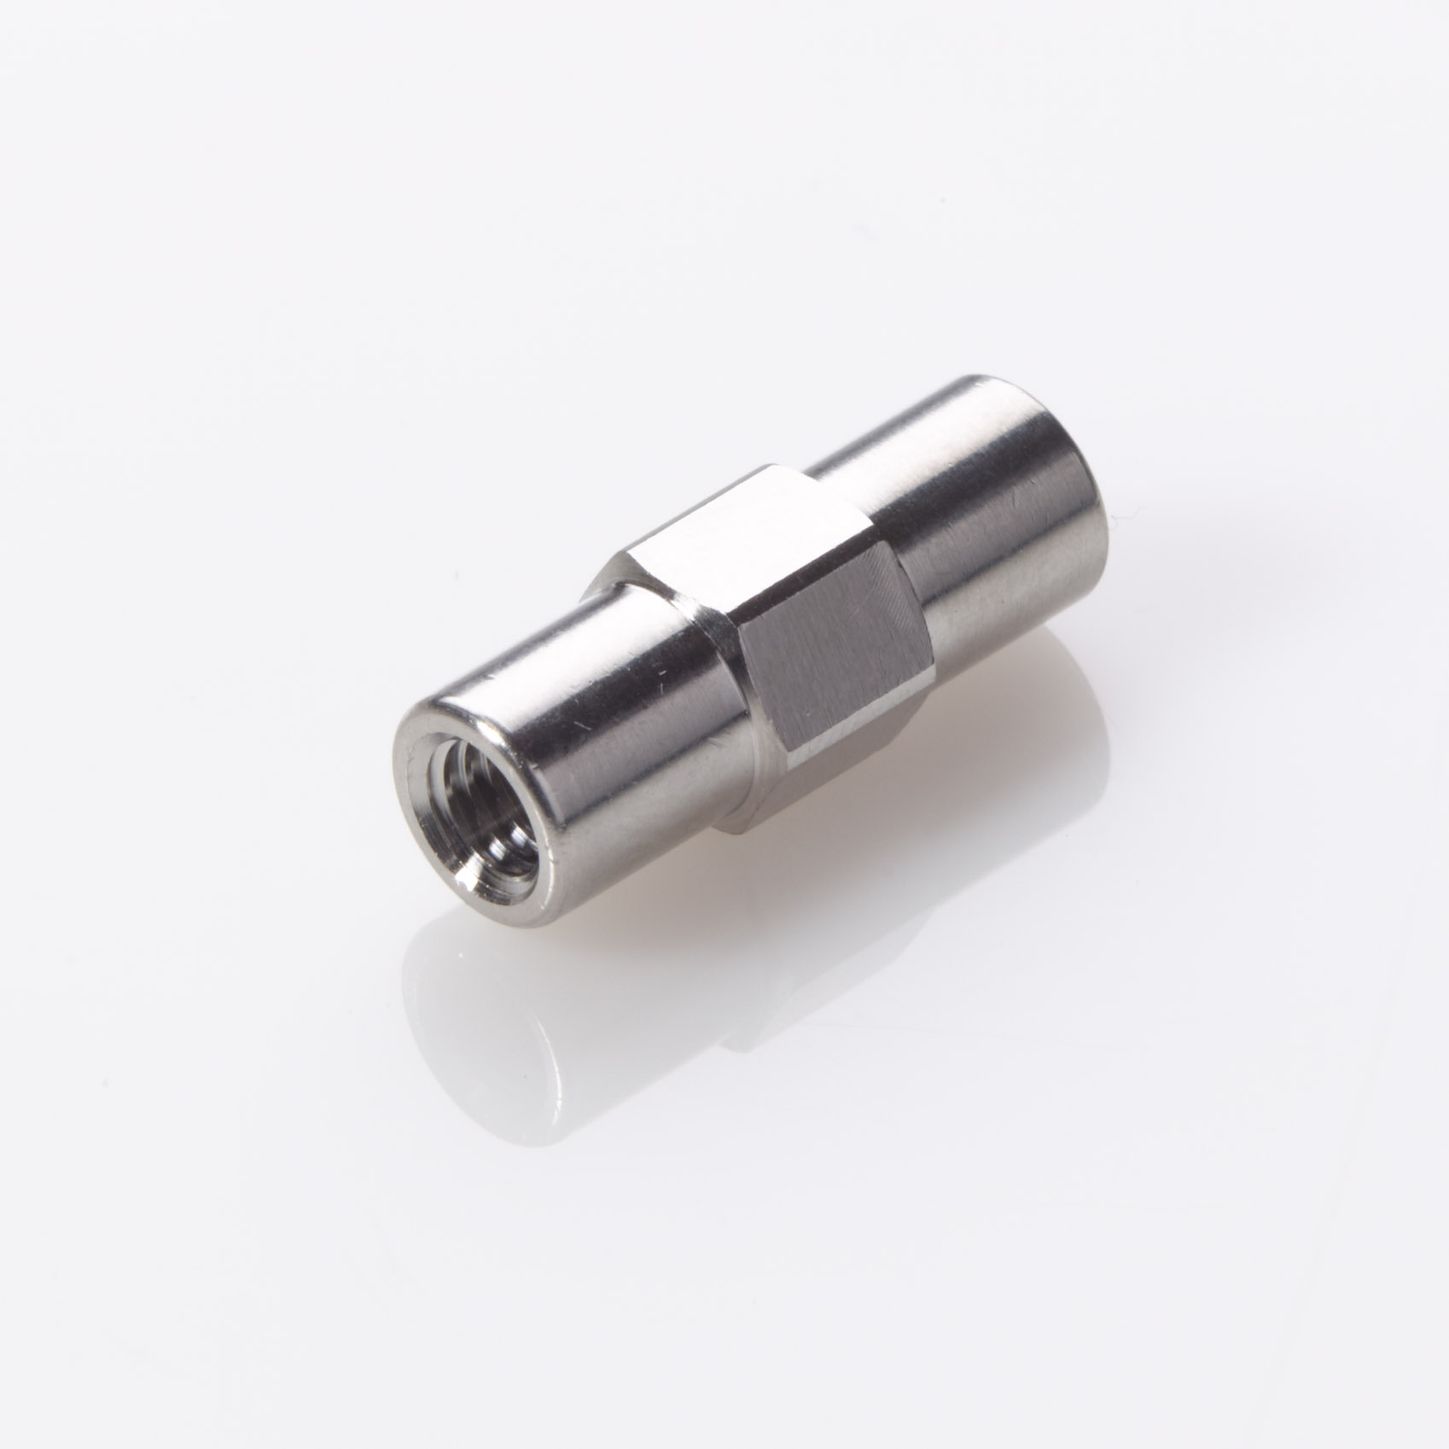 Connector Union ZDV Stainless Steel 0.020 (0.50mm) Thru-Hole for 1/16" OD Tubing (Union Body Only)